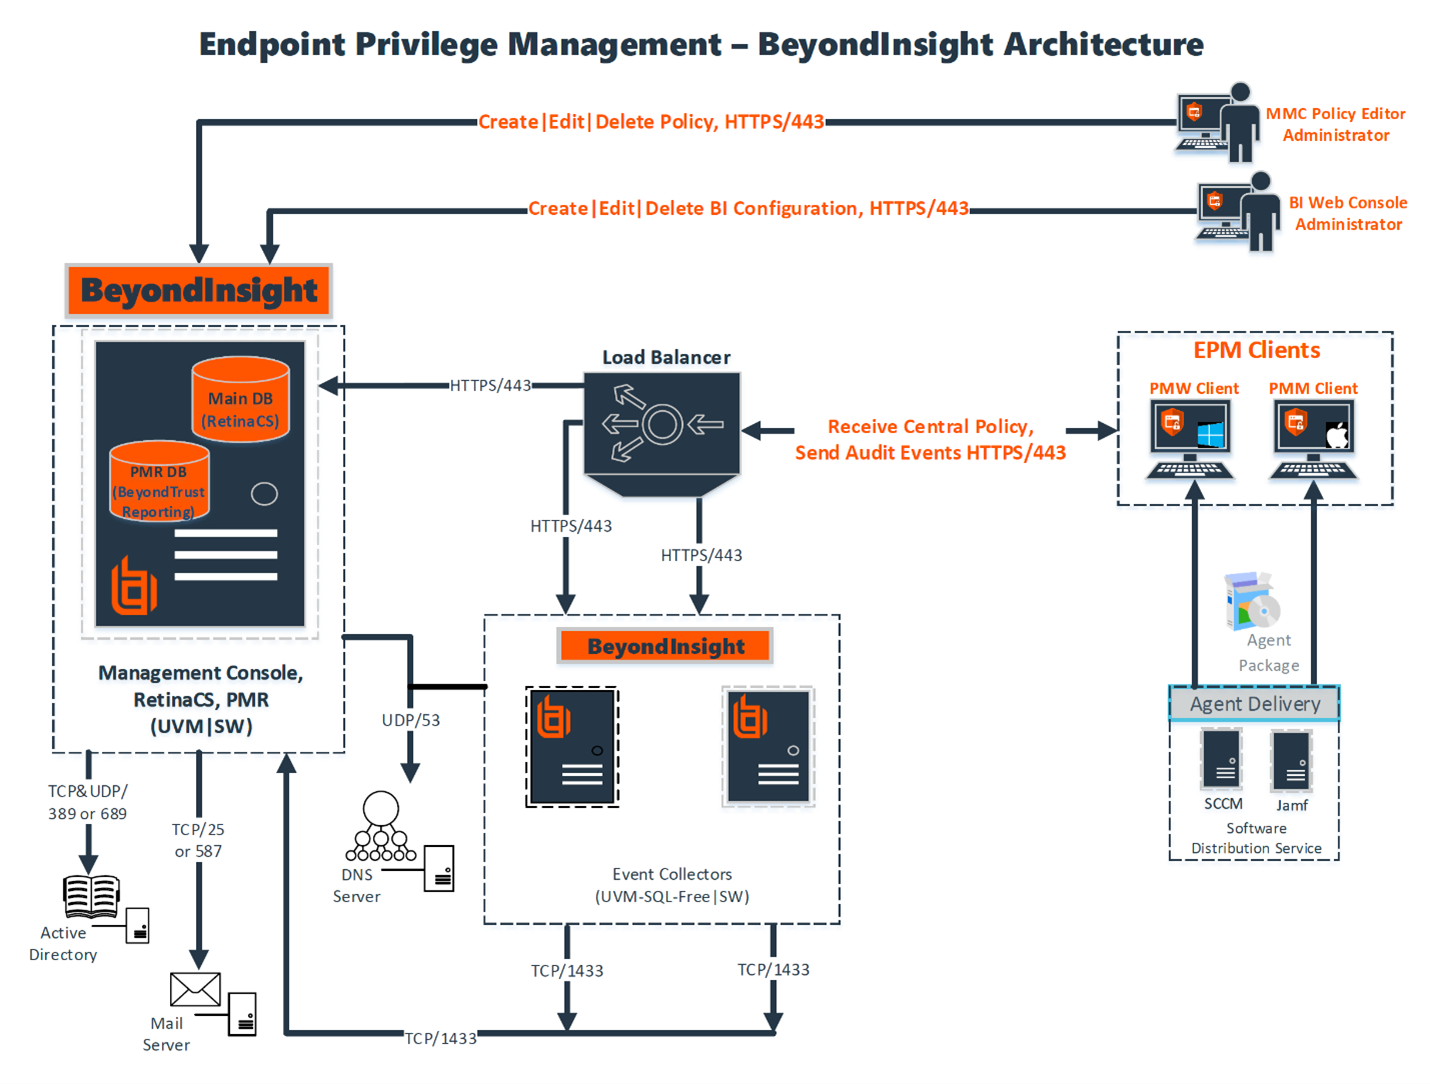 BeyondInsight and Endpoint Privilege Management architecture diagram